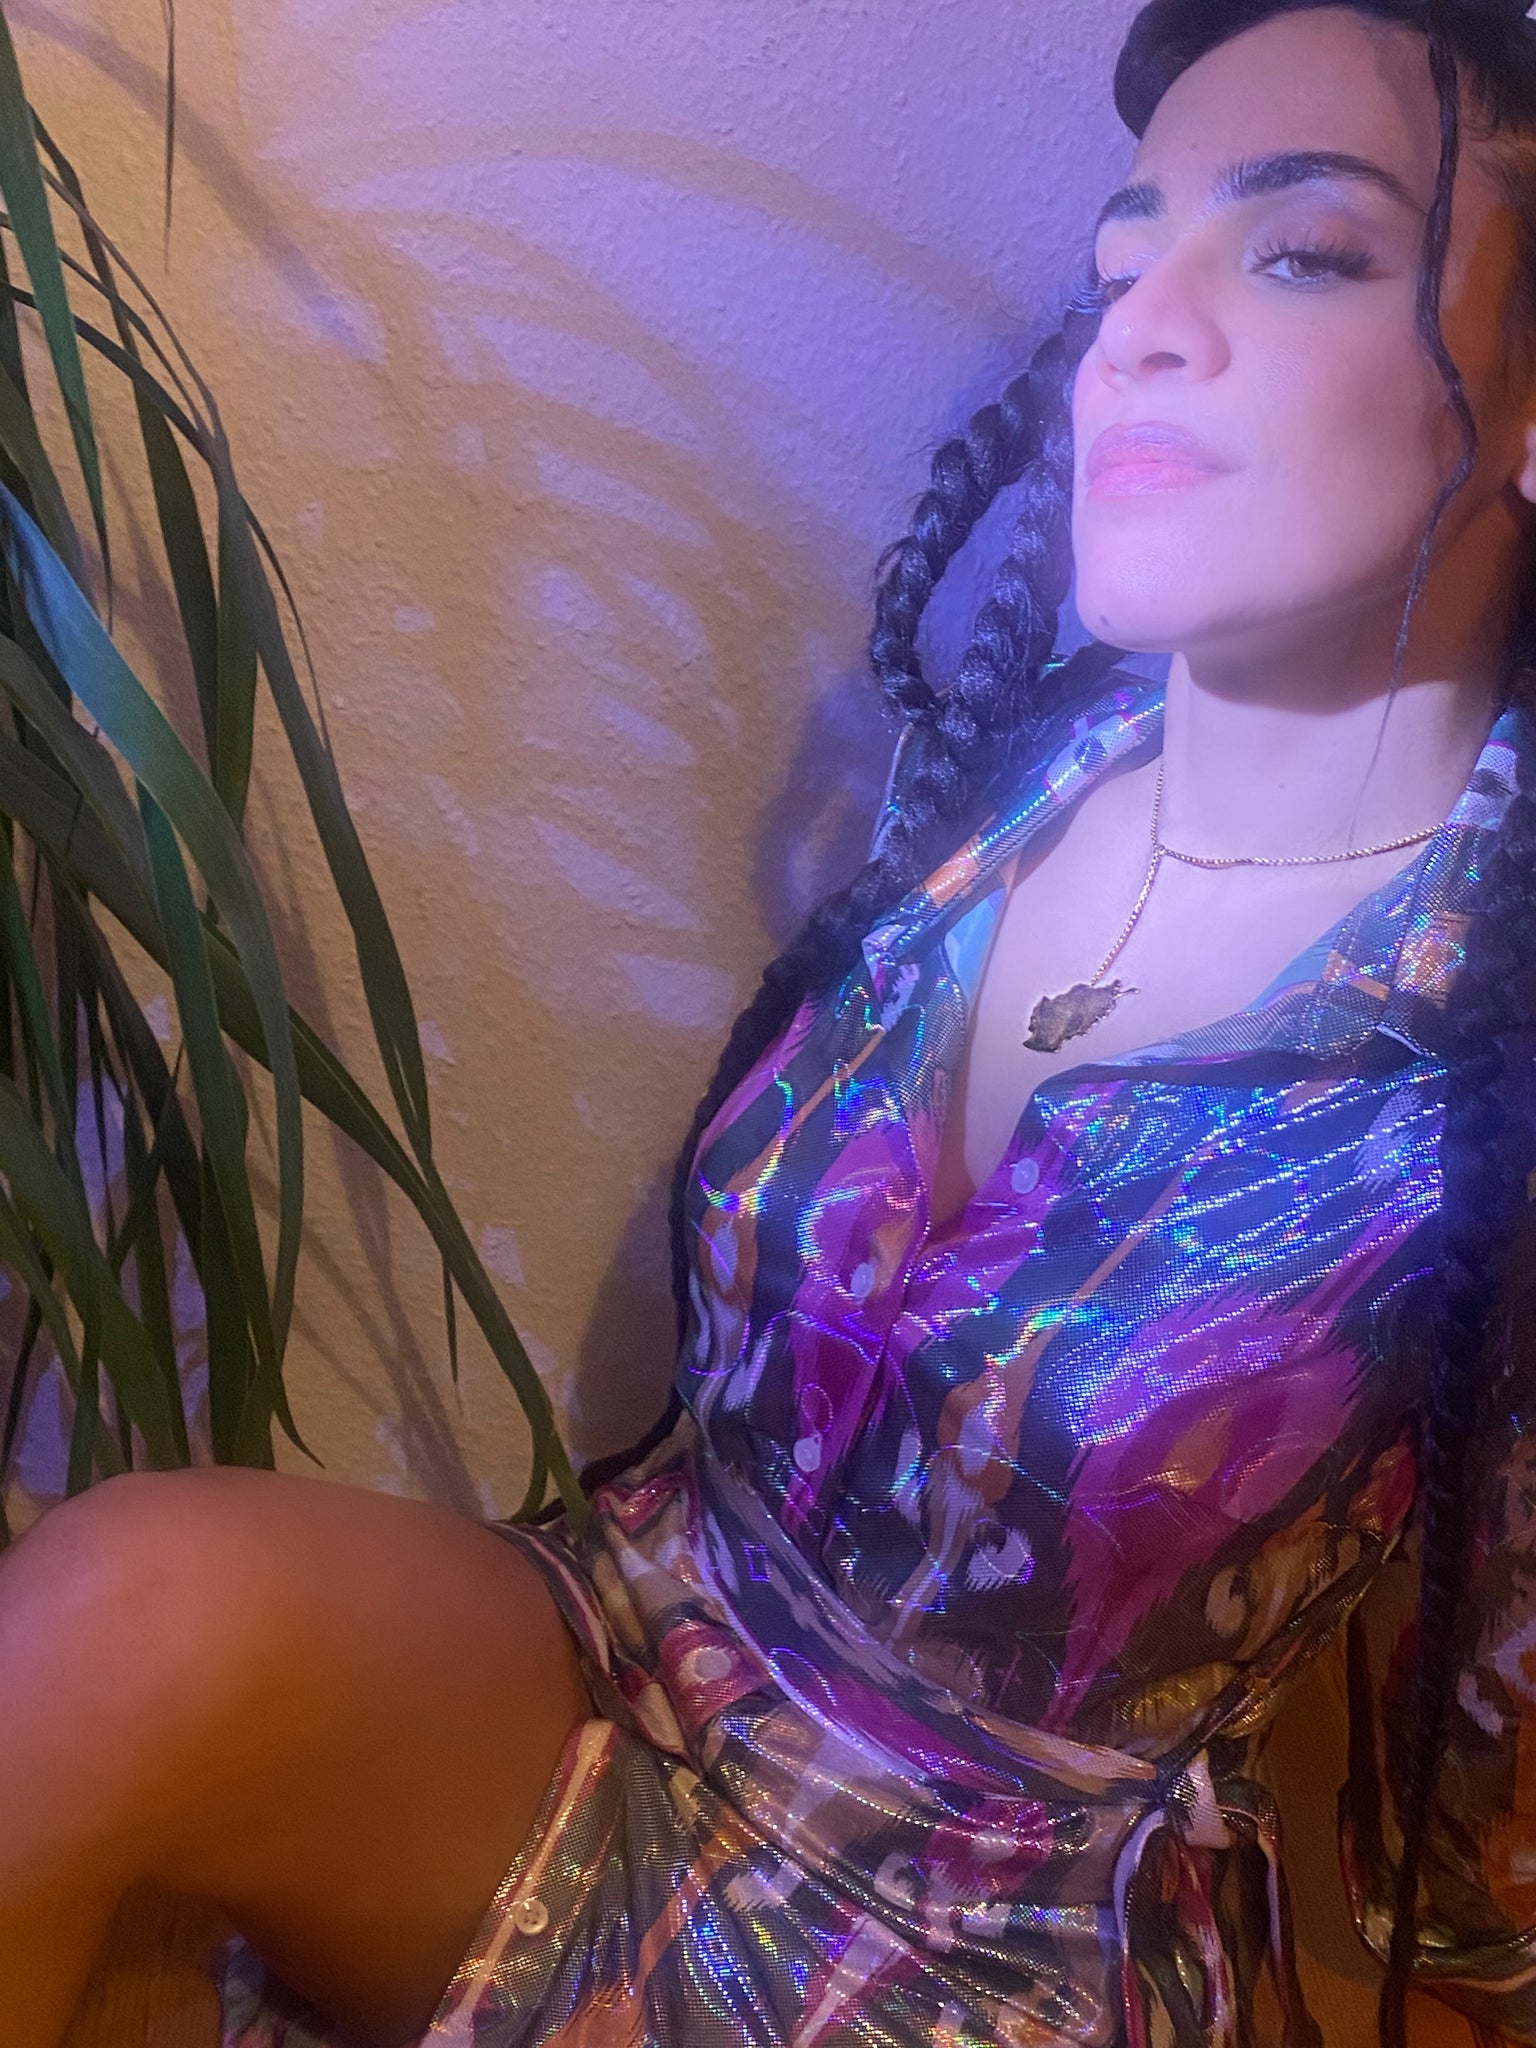 A close up of a woman wearing a green, purple, white, orange holographic dress.